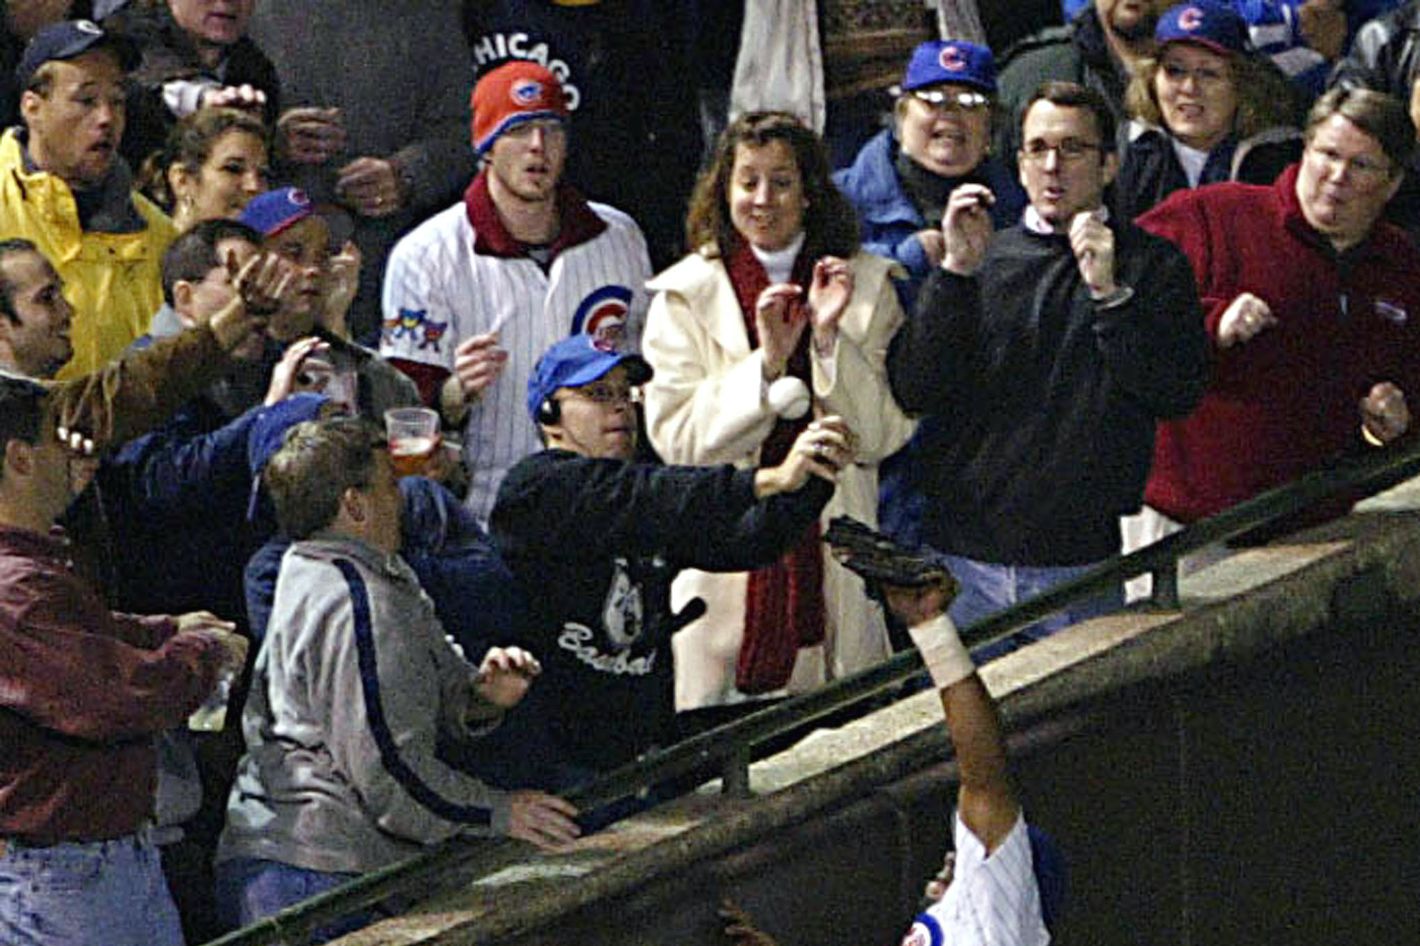 Movie at Tribeca 'Catching Hell' looks at Cubs fan Steve Bartman's